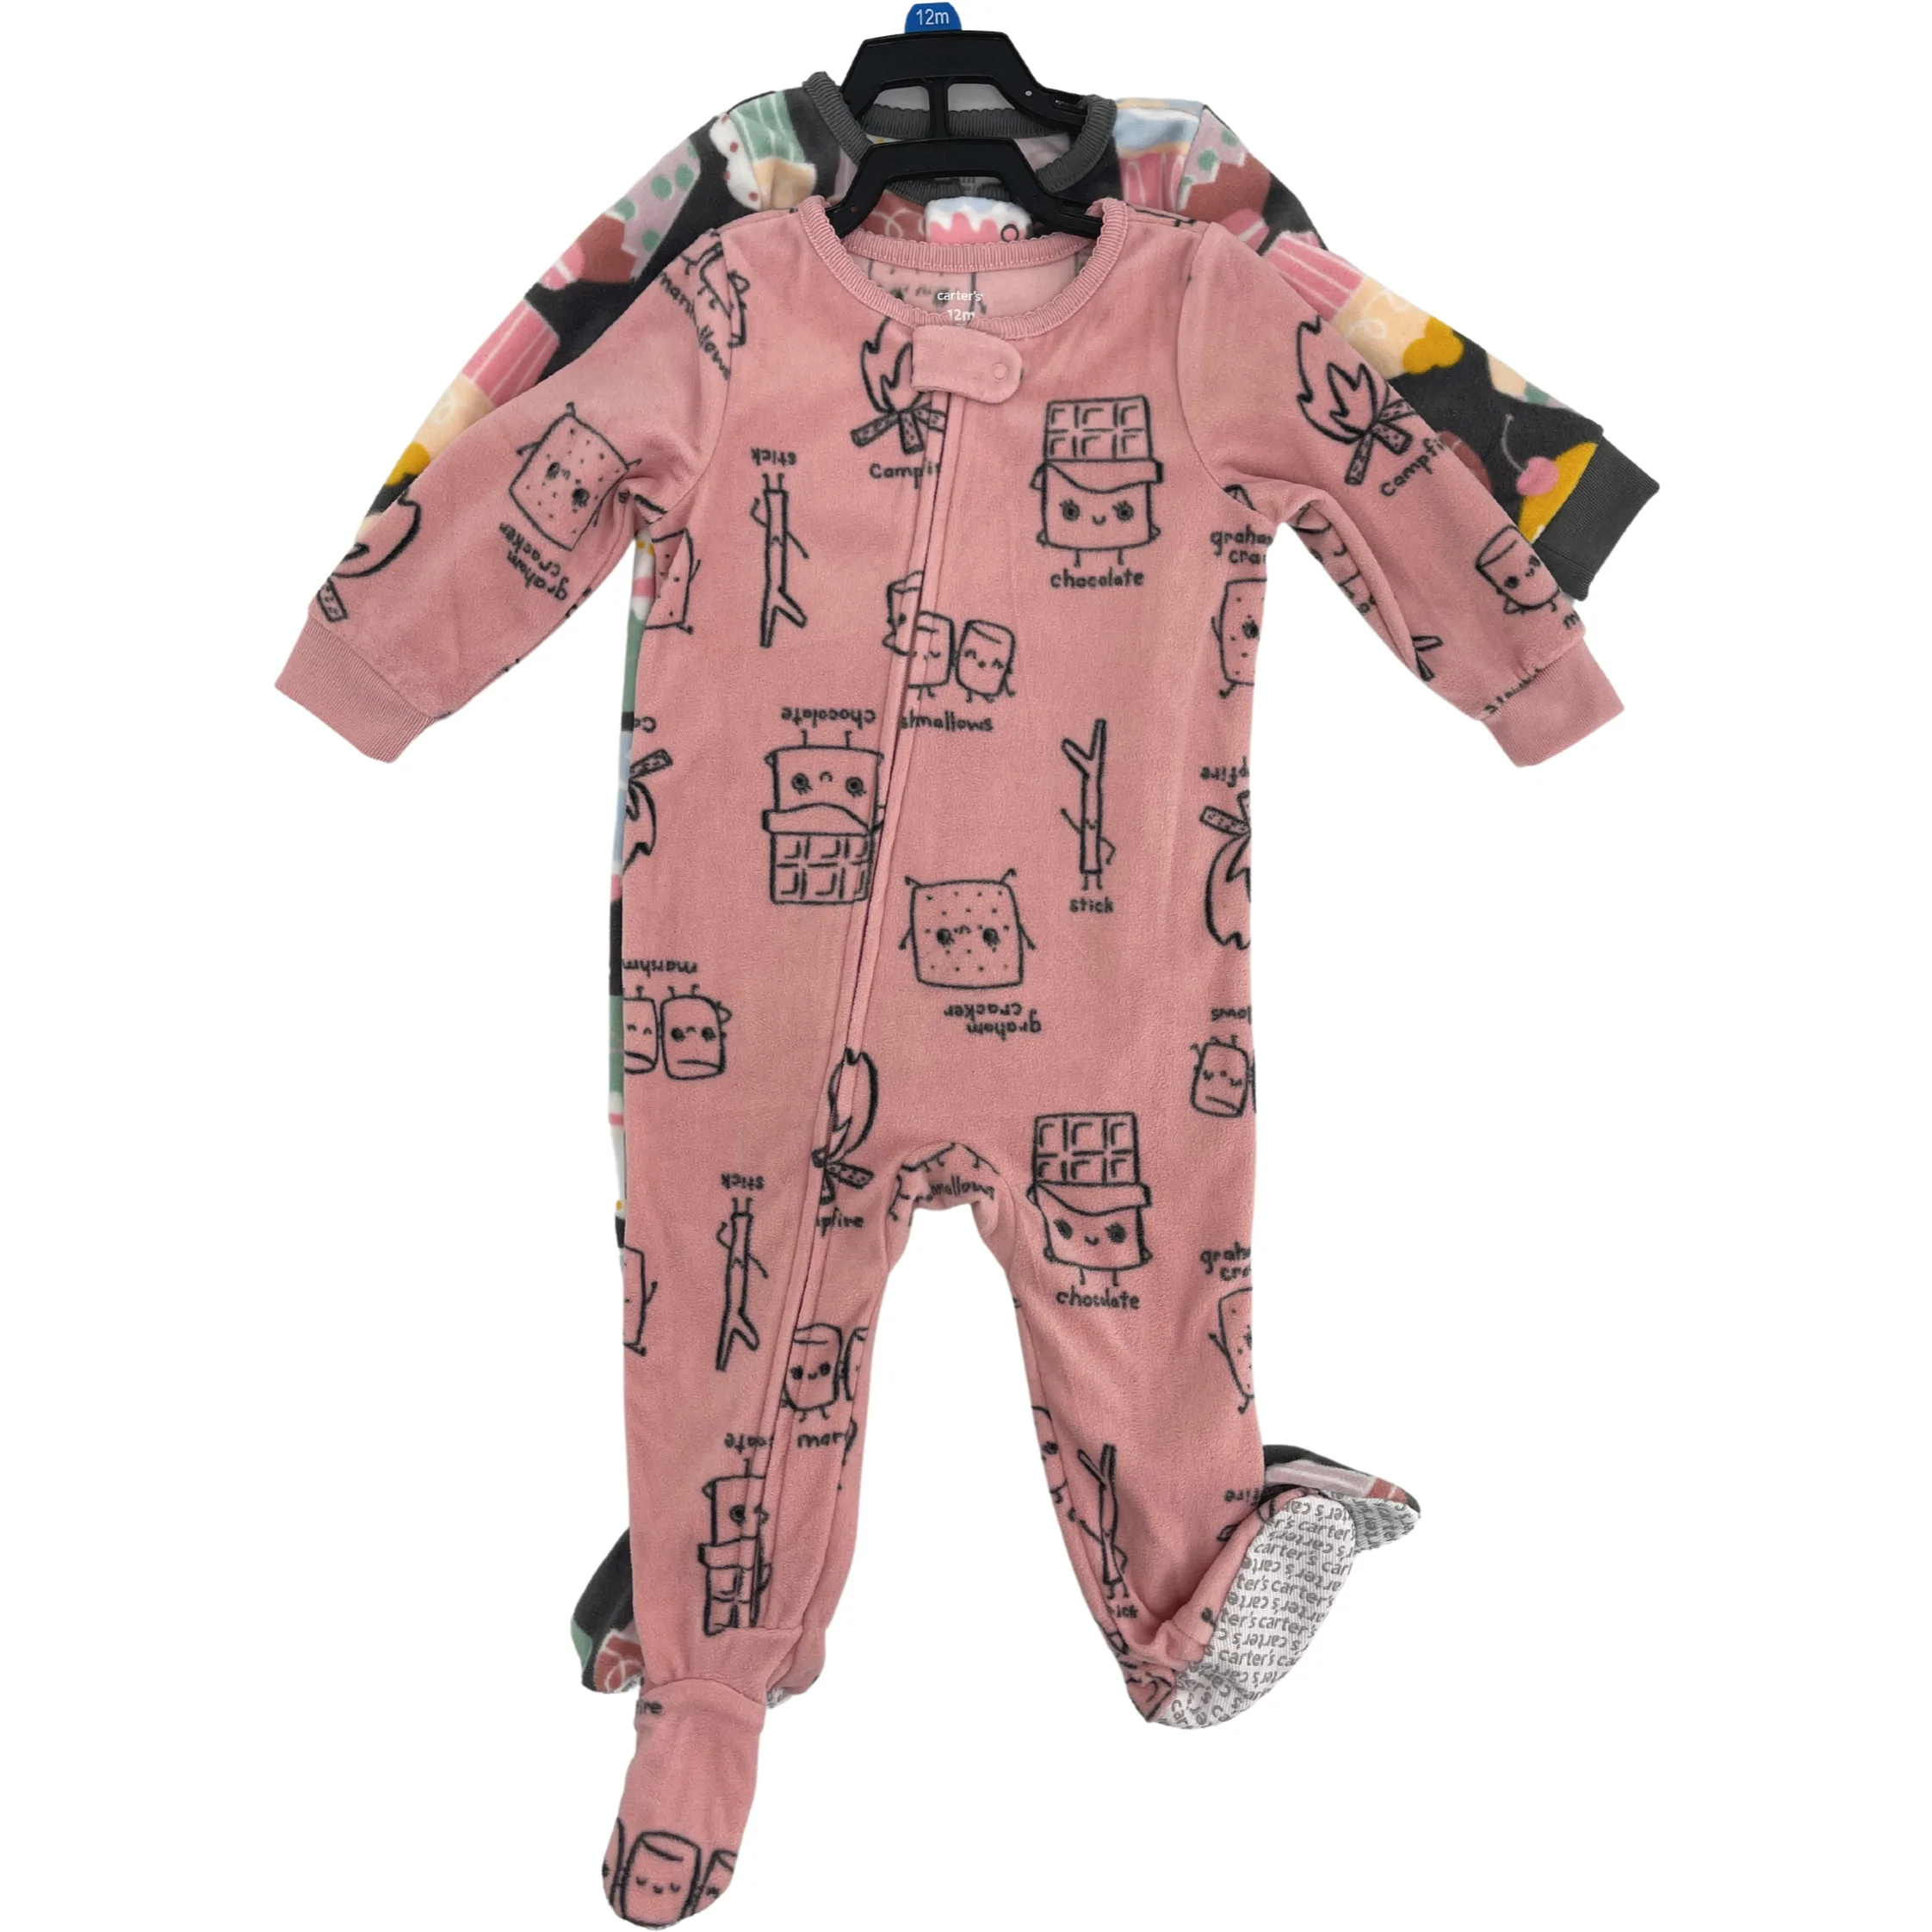 Carter's Infant Girl's One Piece / 2 Pack / Girl's Pyjamas / Size 12 Months **No Tags**